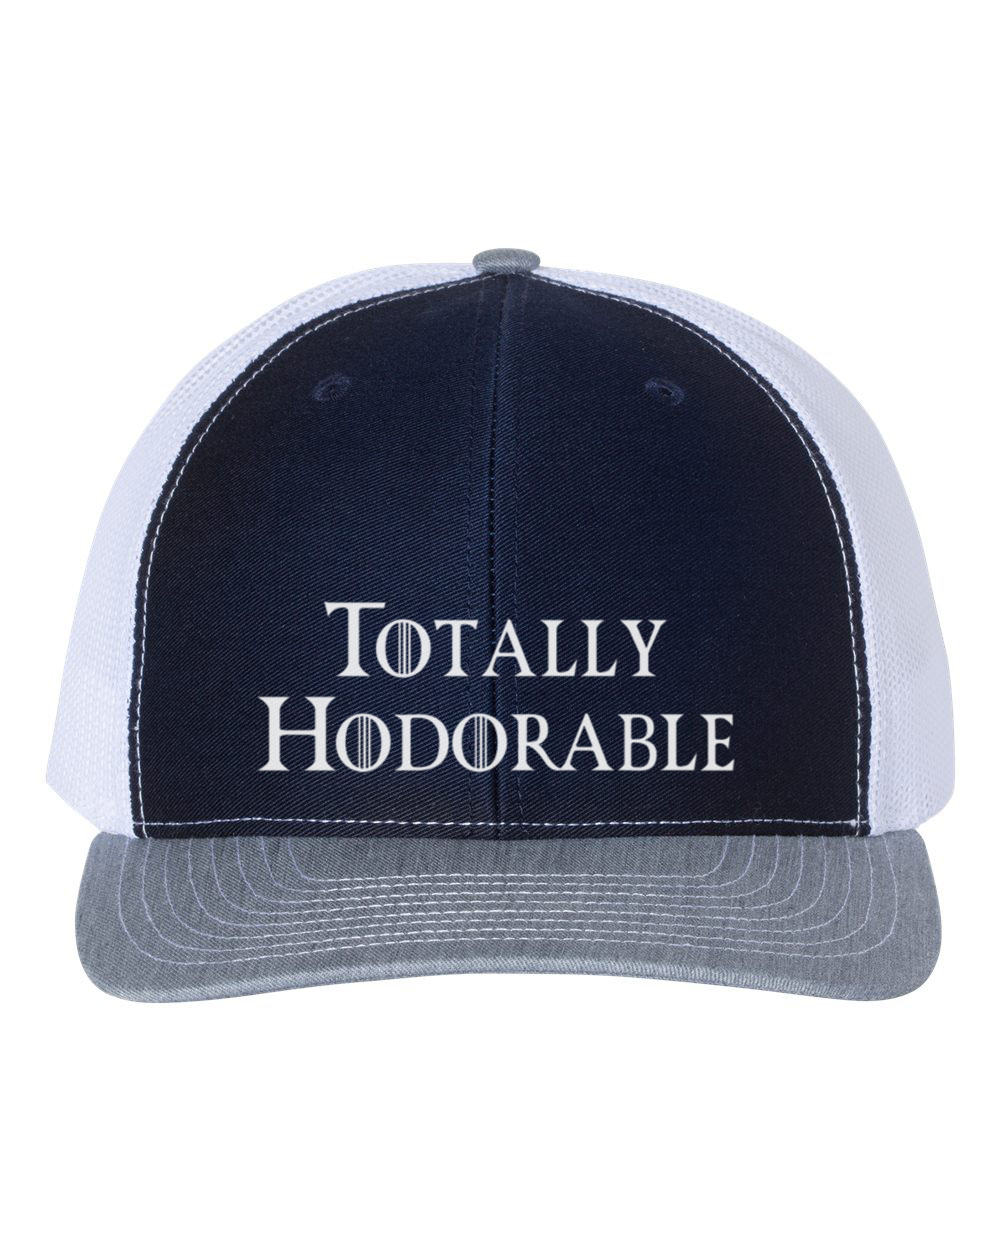 Game Of Thrones Hat, Totally Hodorable, GOT Hat, Trucker Hat, Baseball Cap, Adjustable, GOT Apparel, Hodor Hat, 10 Color Options, White Text, Navy/White/Heather - image 1 of 1